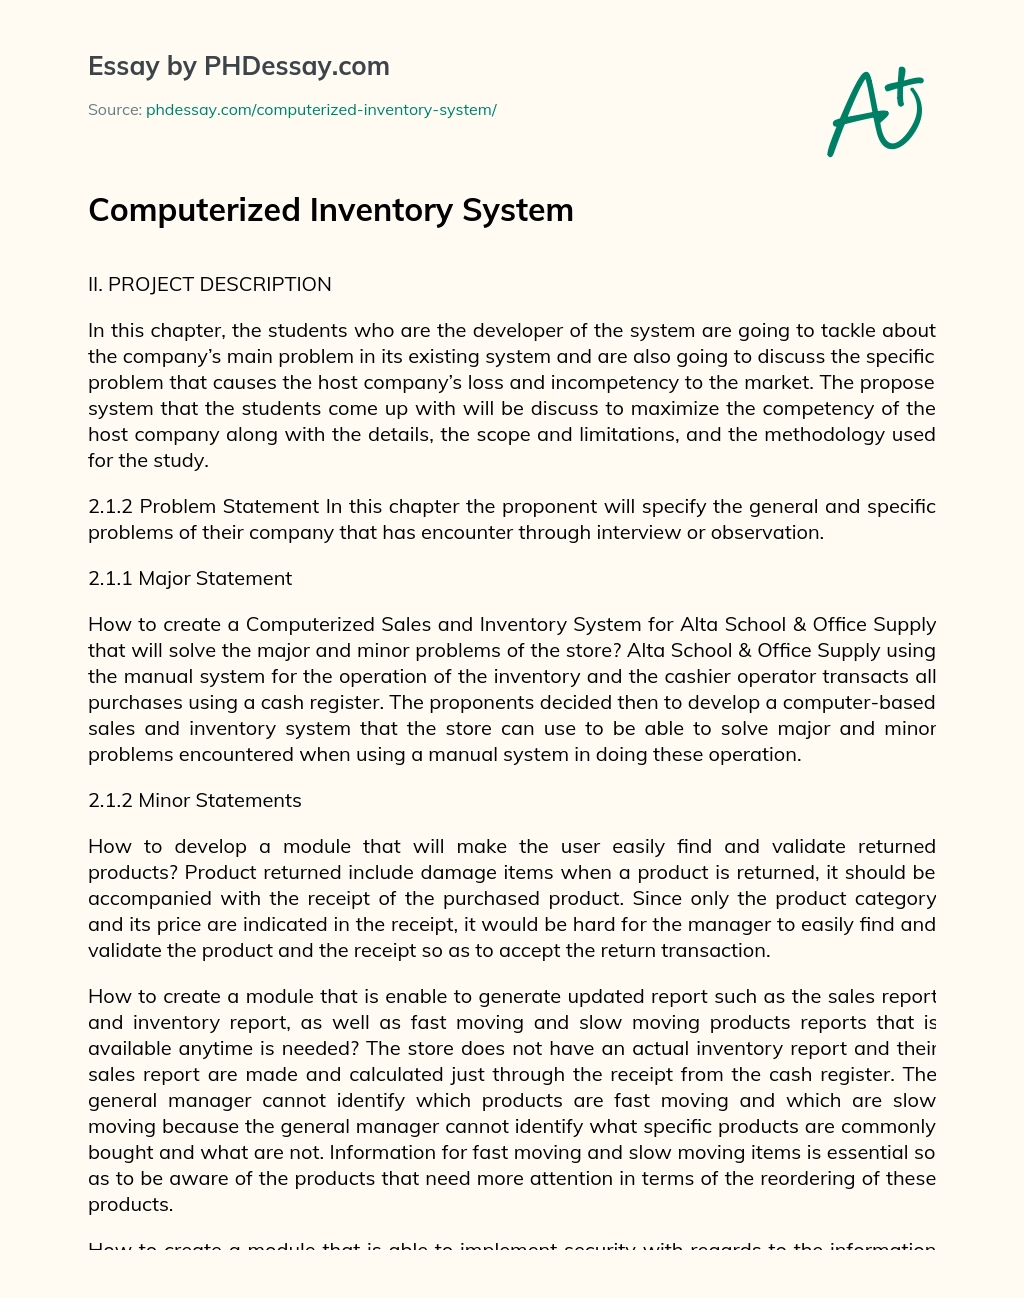 Computerized Inventory System essay